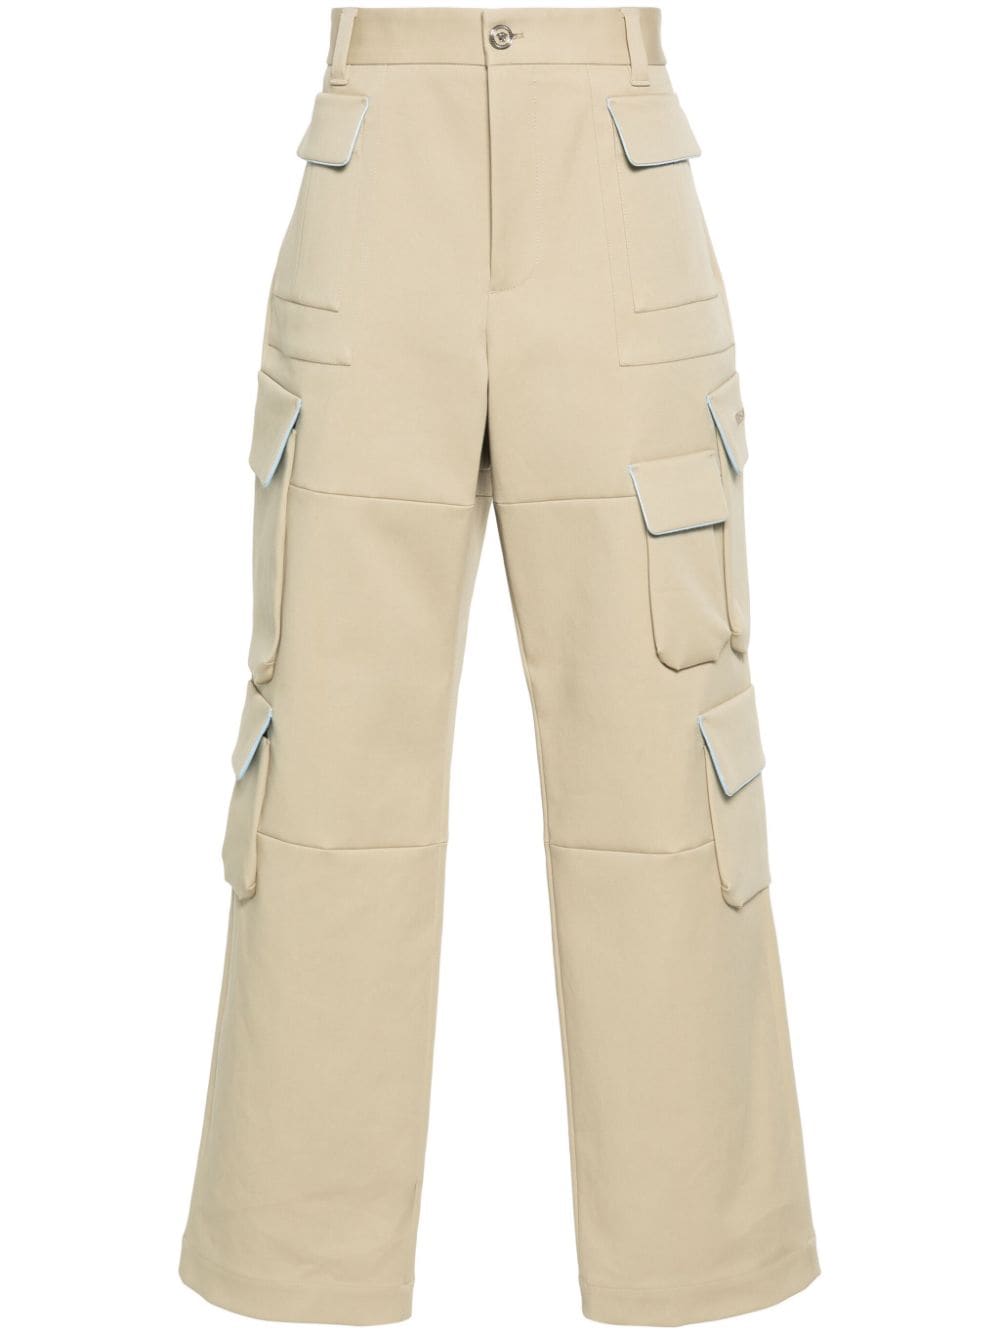 logo-embroidered cargo pants